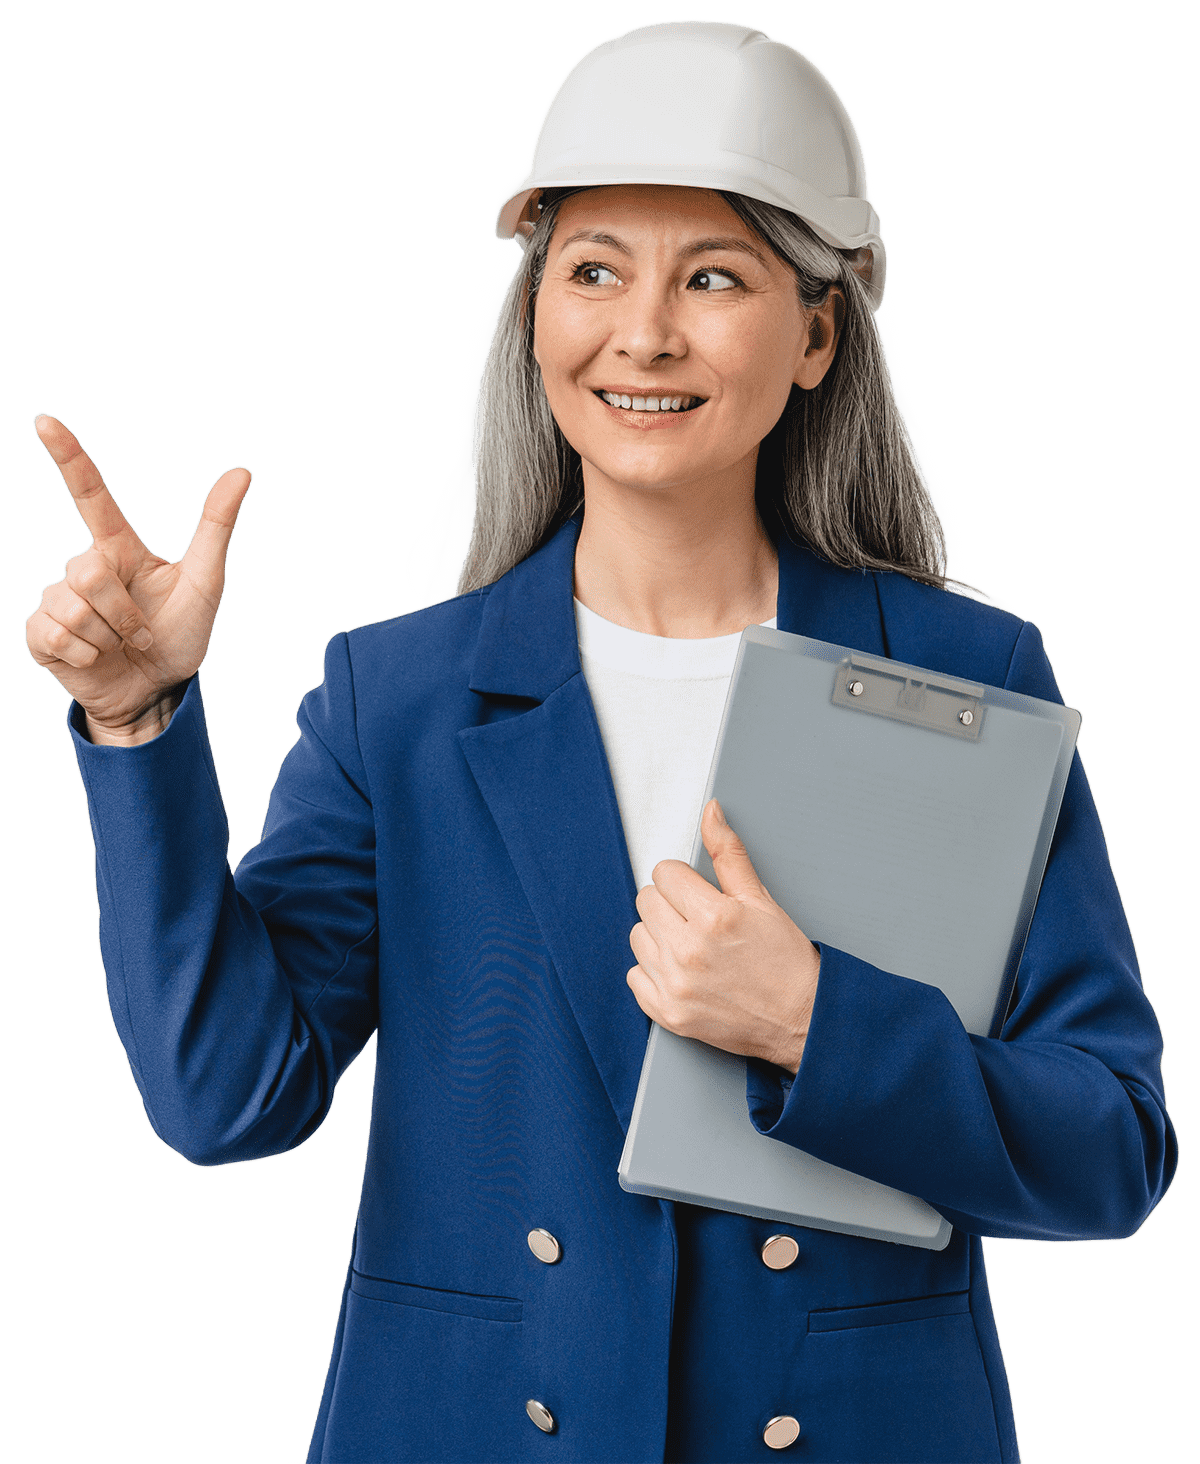 a woman wearing a hard hat is holding a clipboard and pointing up .